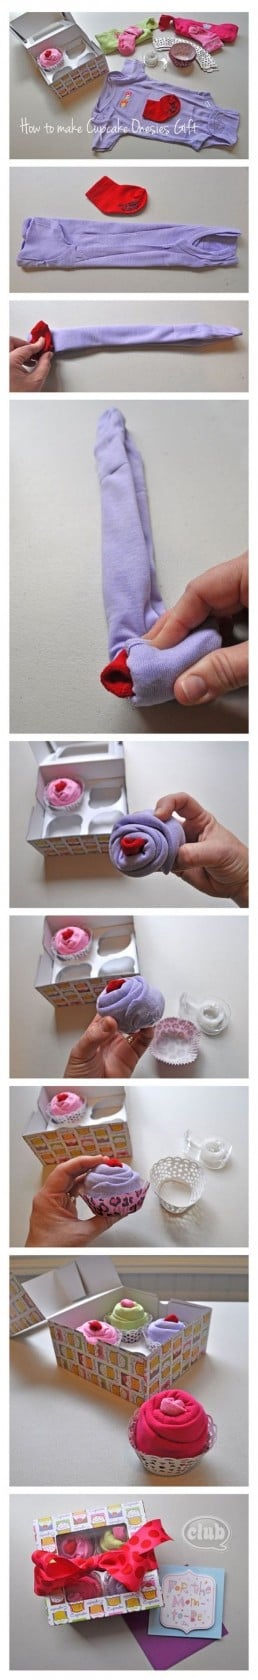 Baby Sock Cupcakes...these BEST Baby Shower Ideas!